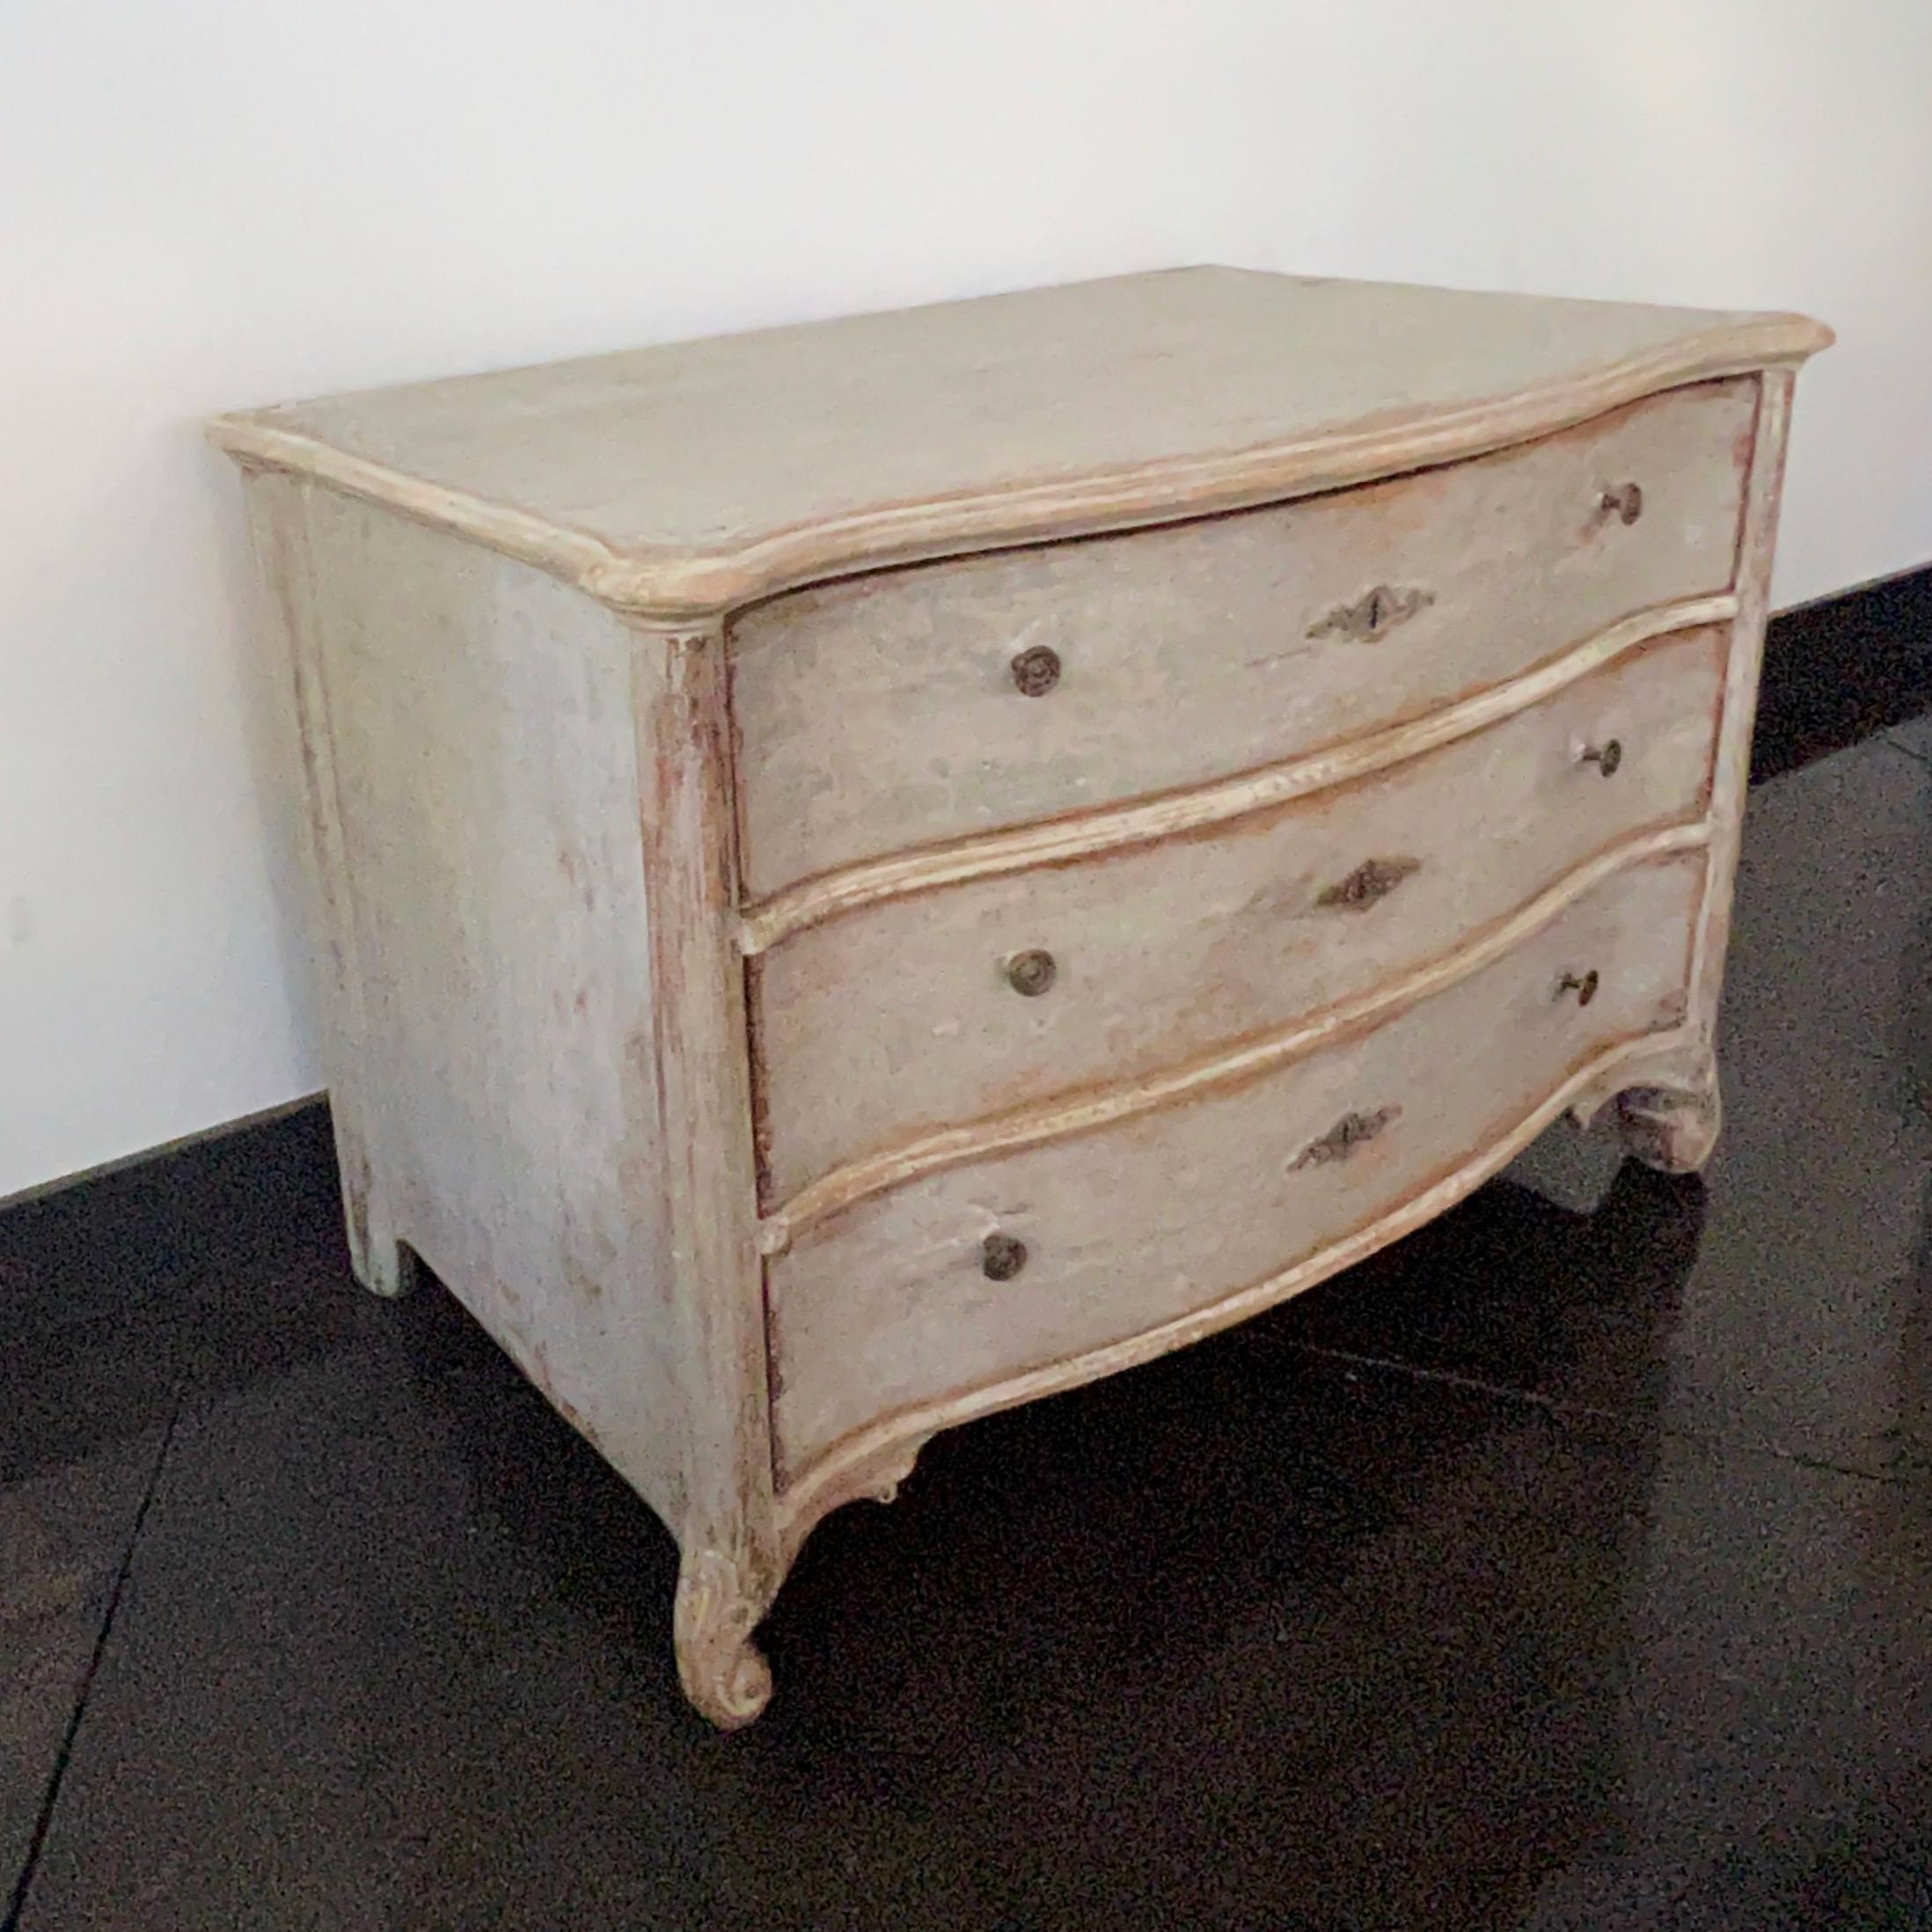 18th century chest of drawers from late Baroque period in richly carved curvaceous serpentine drawer fronts, shaped top and carved feet in super time worn patina.
Germany
More than ever, we selected the best, the rarest, the unusual, the